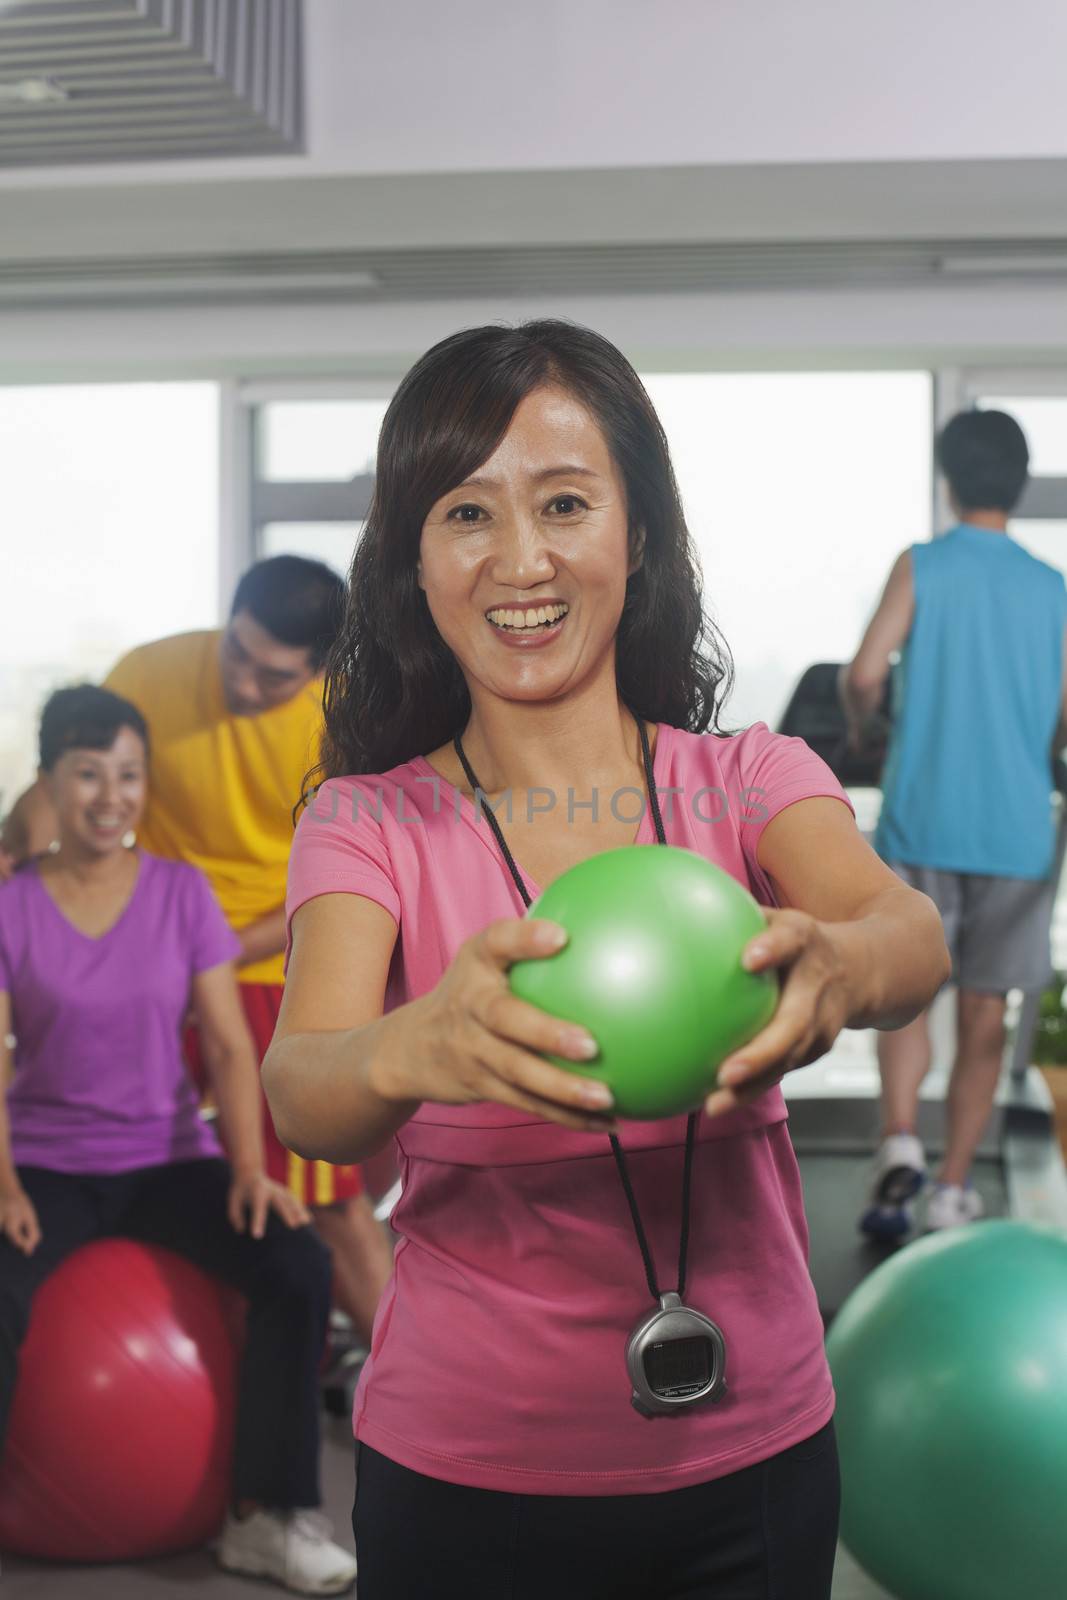 Woman holding ball on foreground, people working out in the gym on the background by XiXinXing